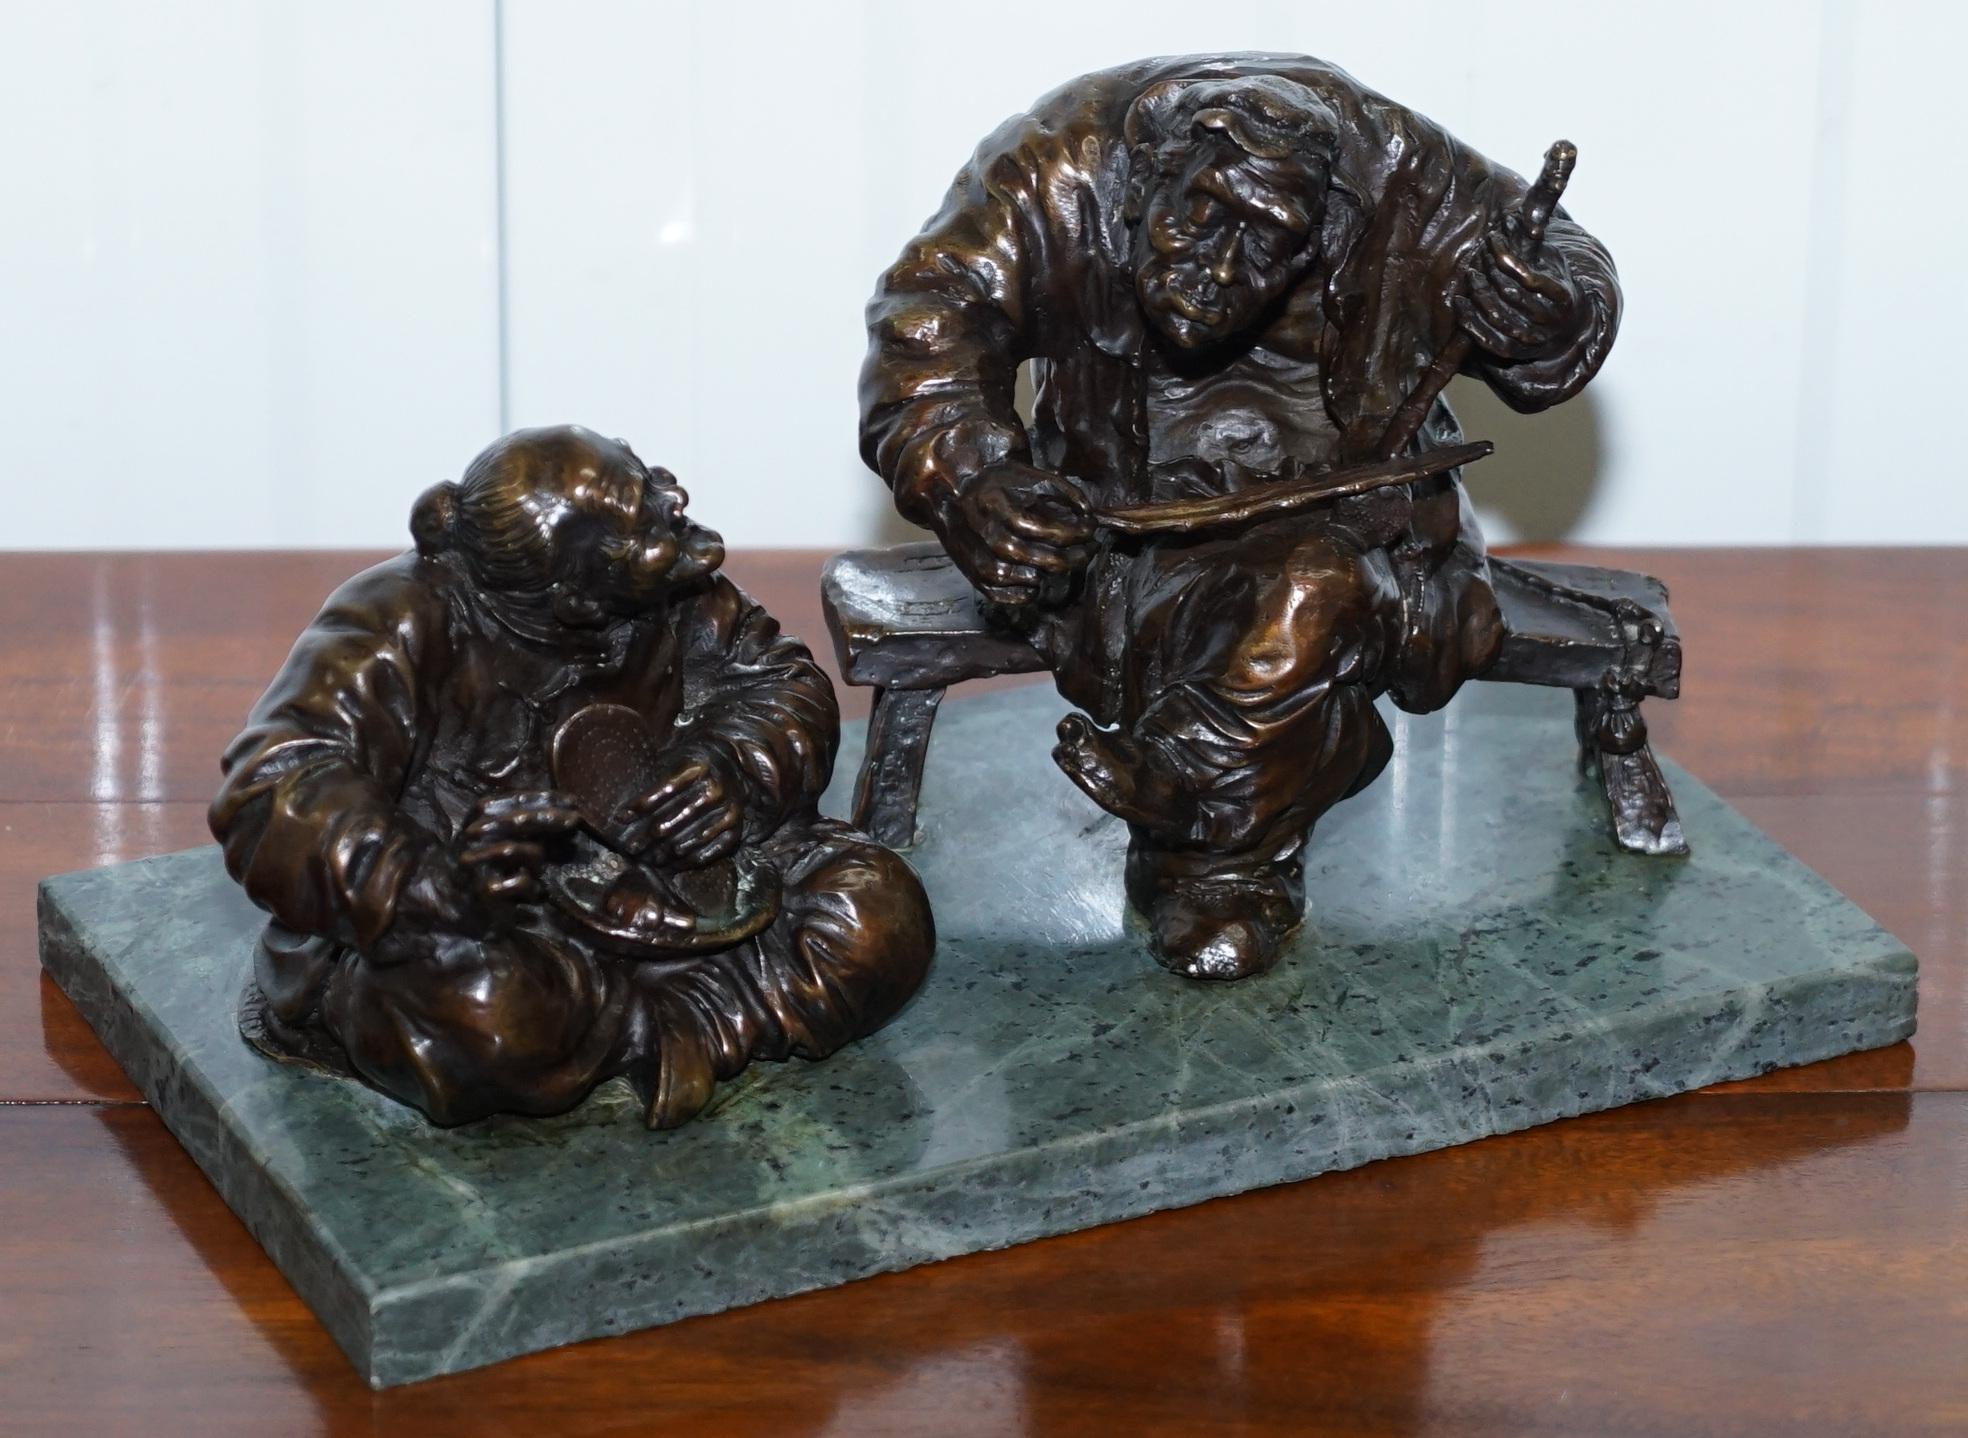 We are delighted to offer for sale this stunning medium sized bronze statue of two Chinese men on a solid green soapstone base signed Aug Mariton.

A very decorative and good sized piece, the Chinese chaps seem to be of humble origins, one is